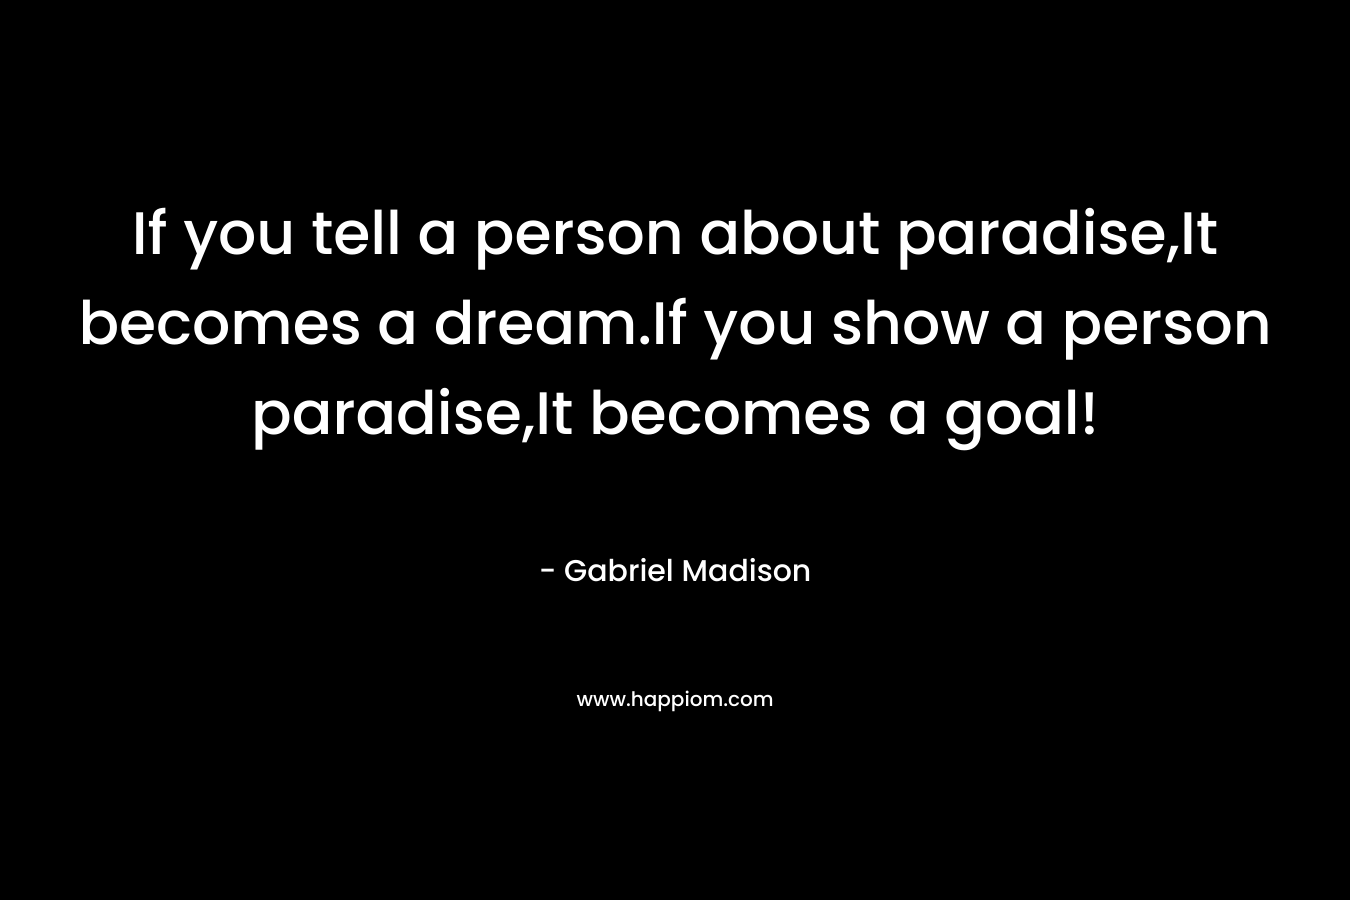 If you tell a person about paradise,It becomes a dream.If you show a person paradise,It becomes a goal!